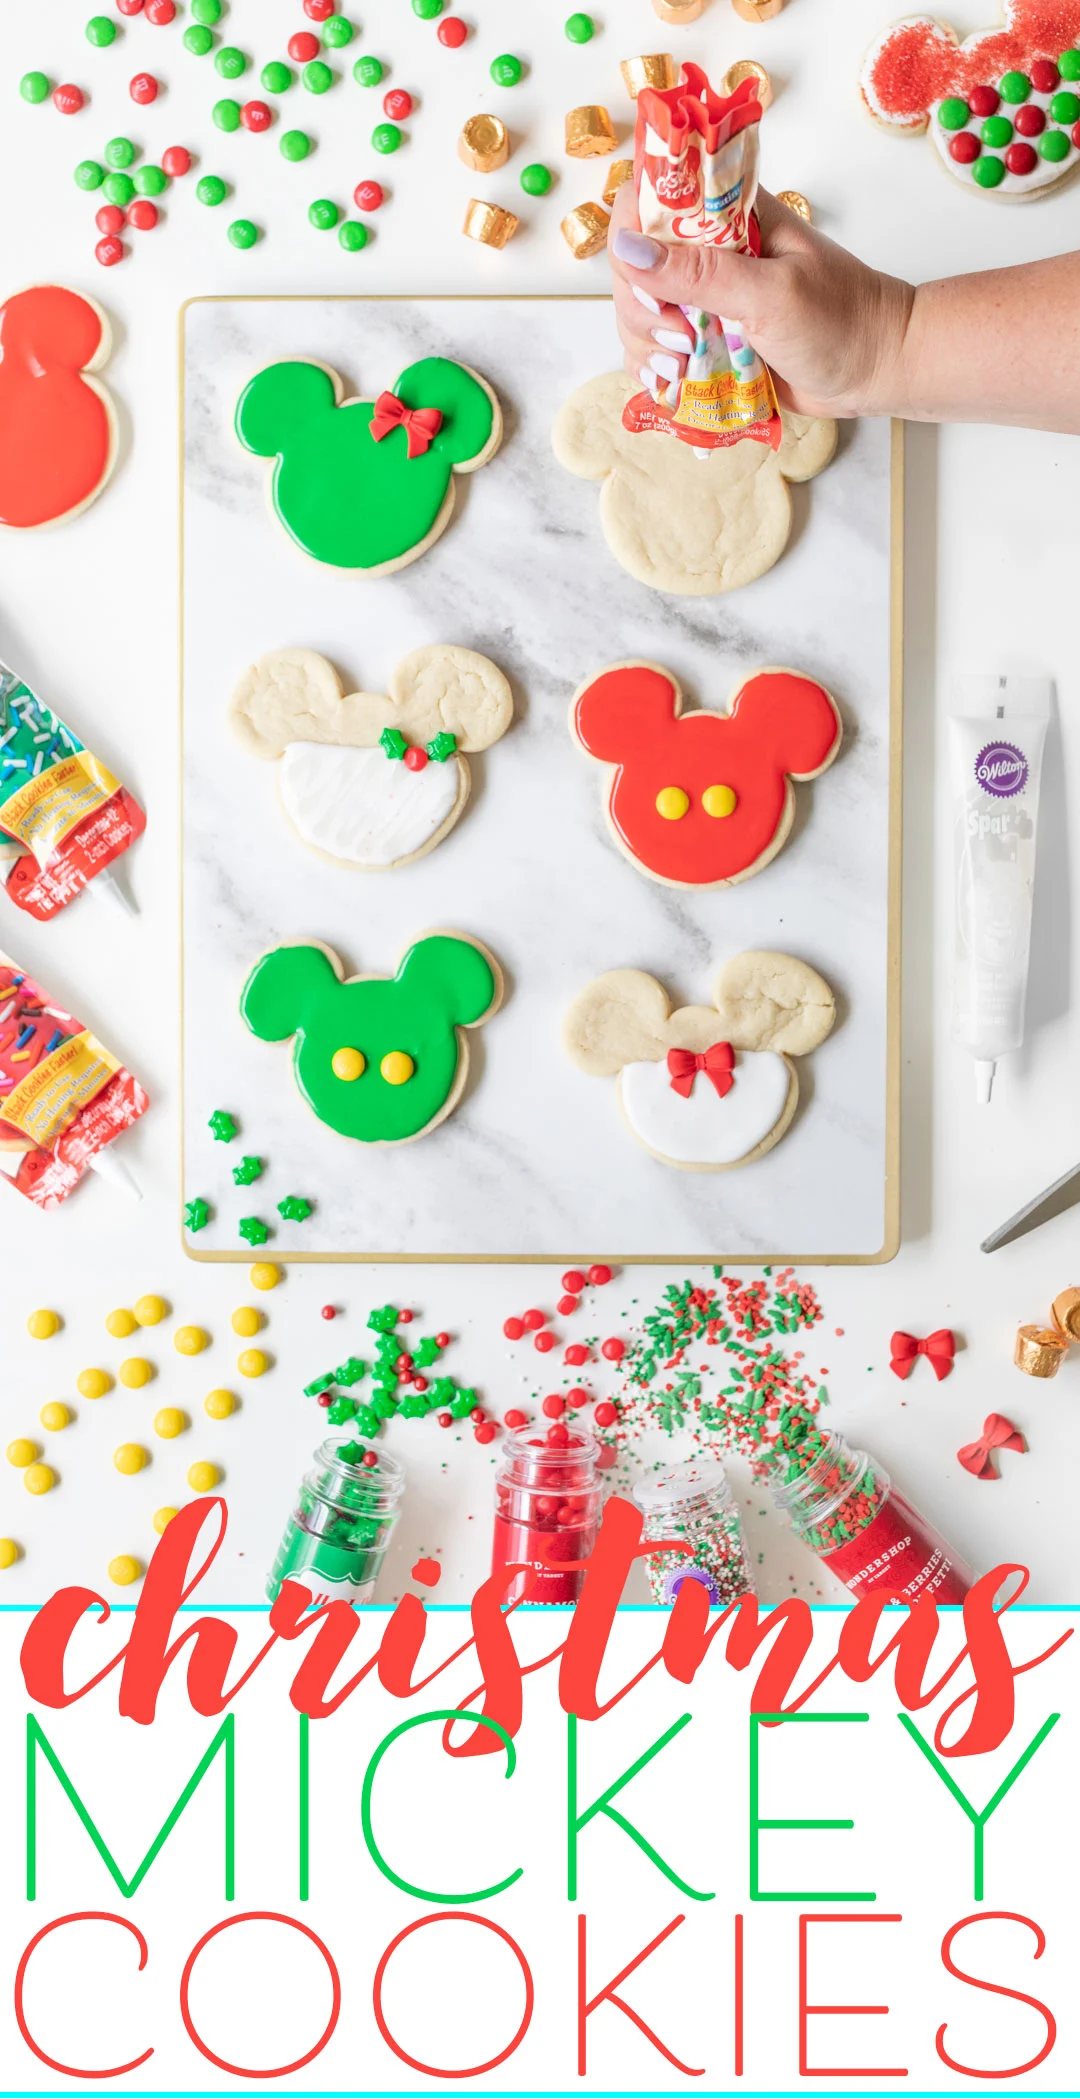 Mickey Christmas Cookies for an easy Disney inspired holiday DIY at home.